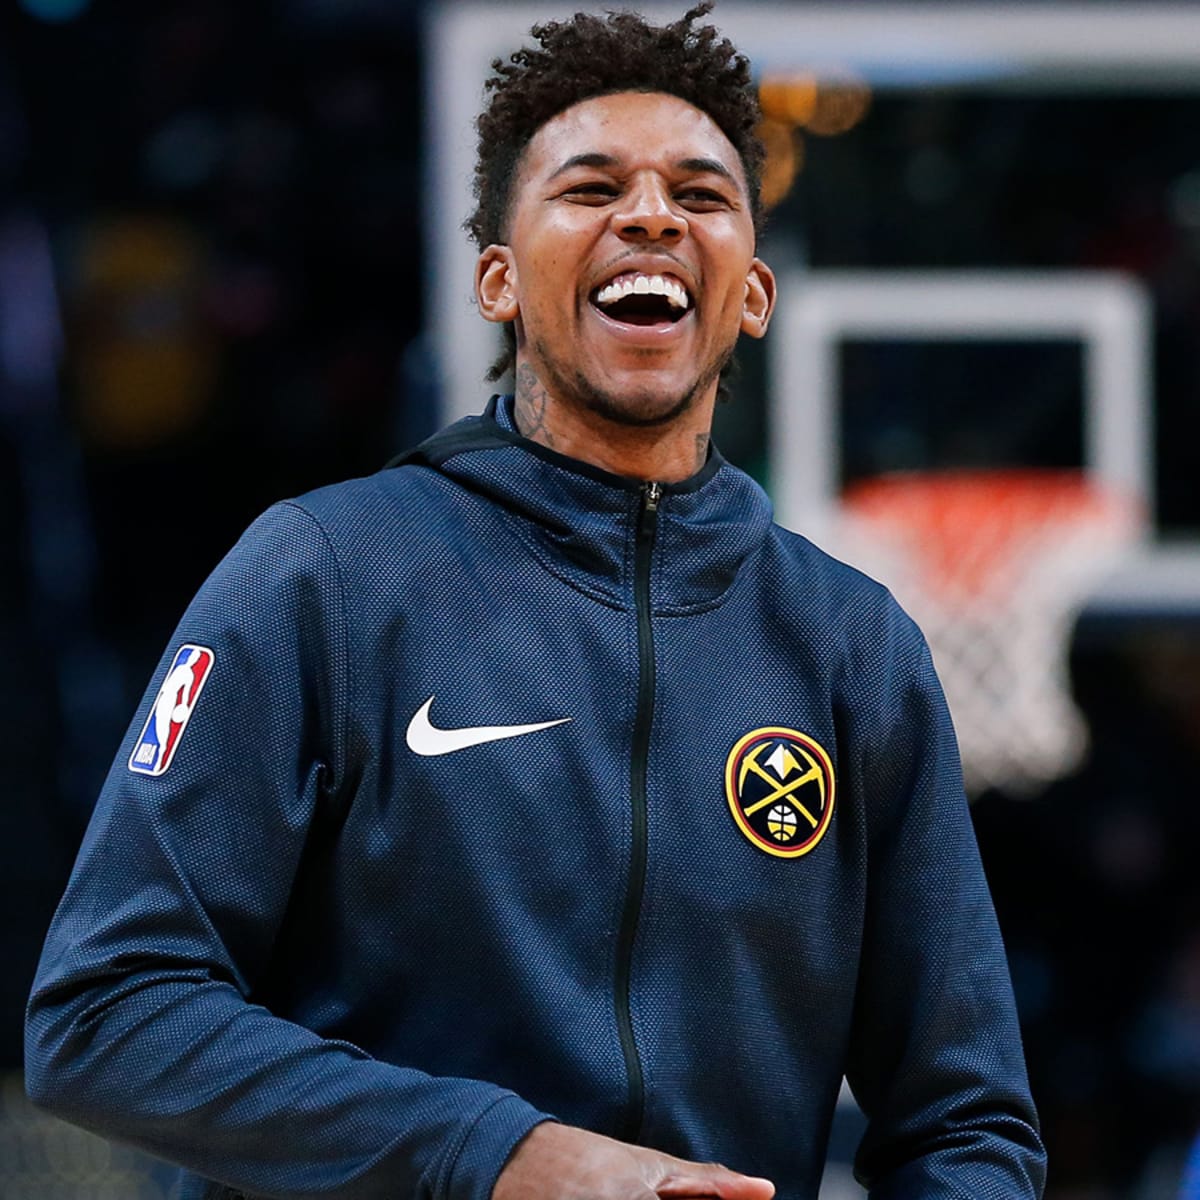 Nick Young and Blueface to face off in celebrity boxing match